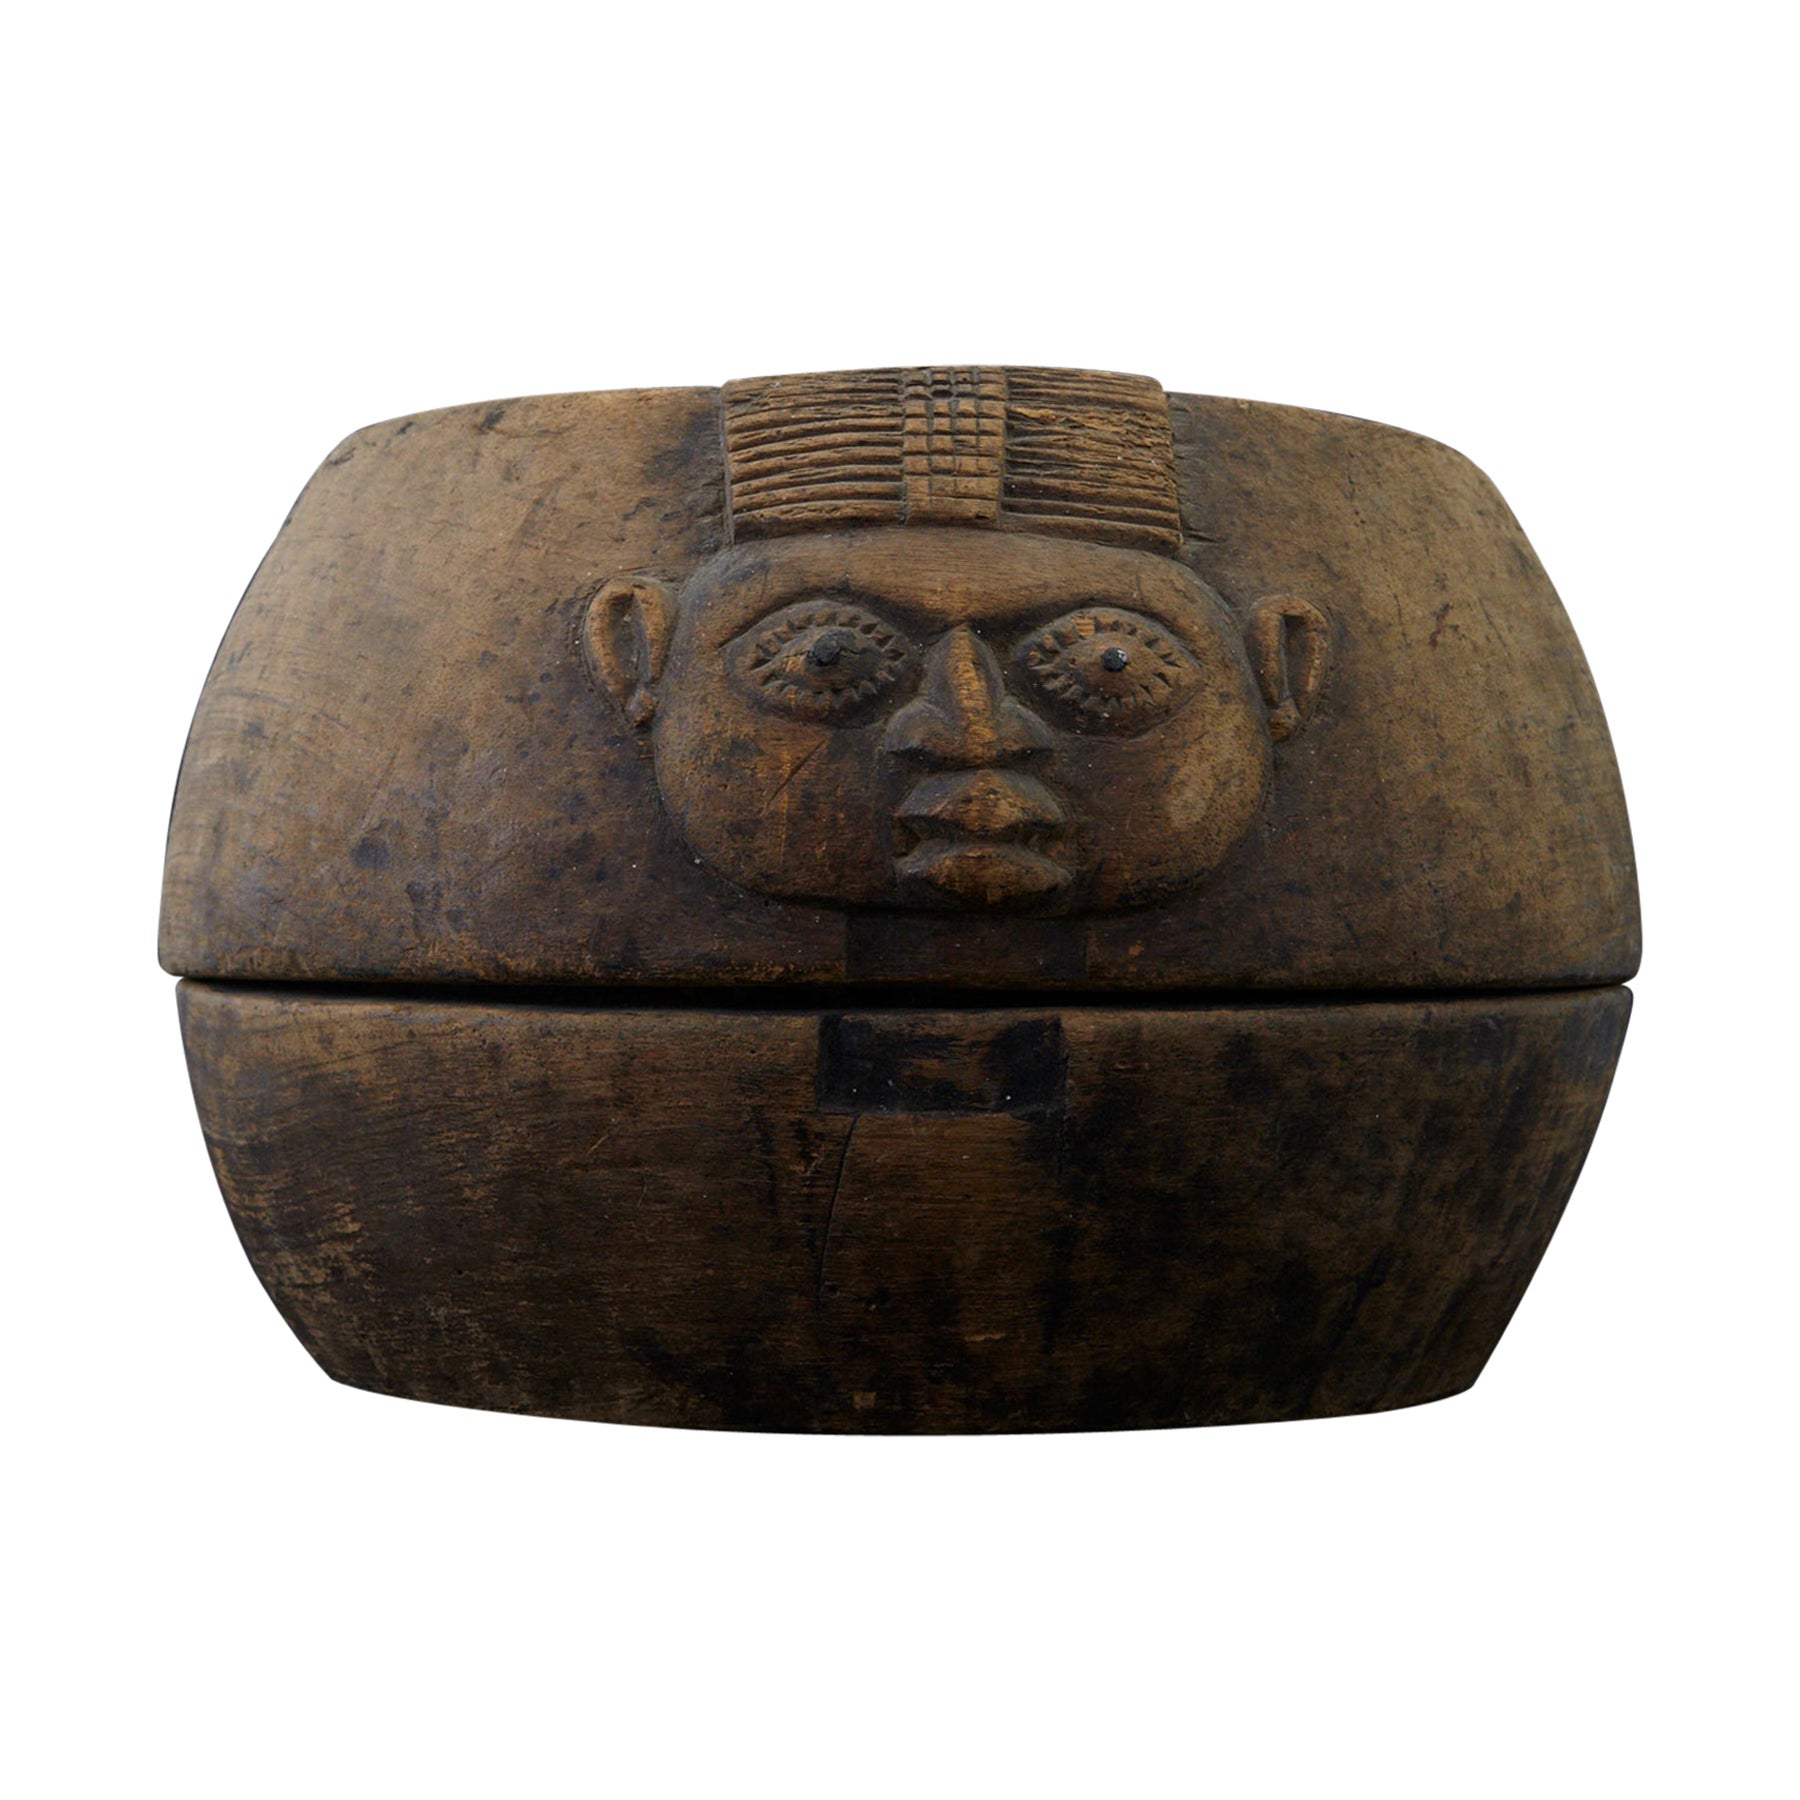 Opon Igede Ifa - Divination Bowl, Yoruba People, Nigeria, Early 20th Century For Sale